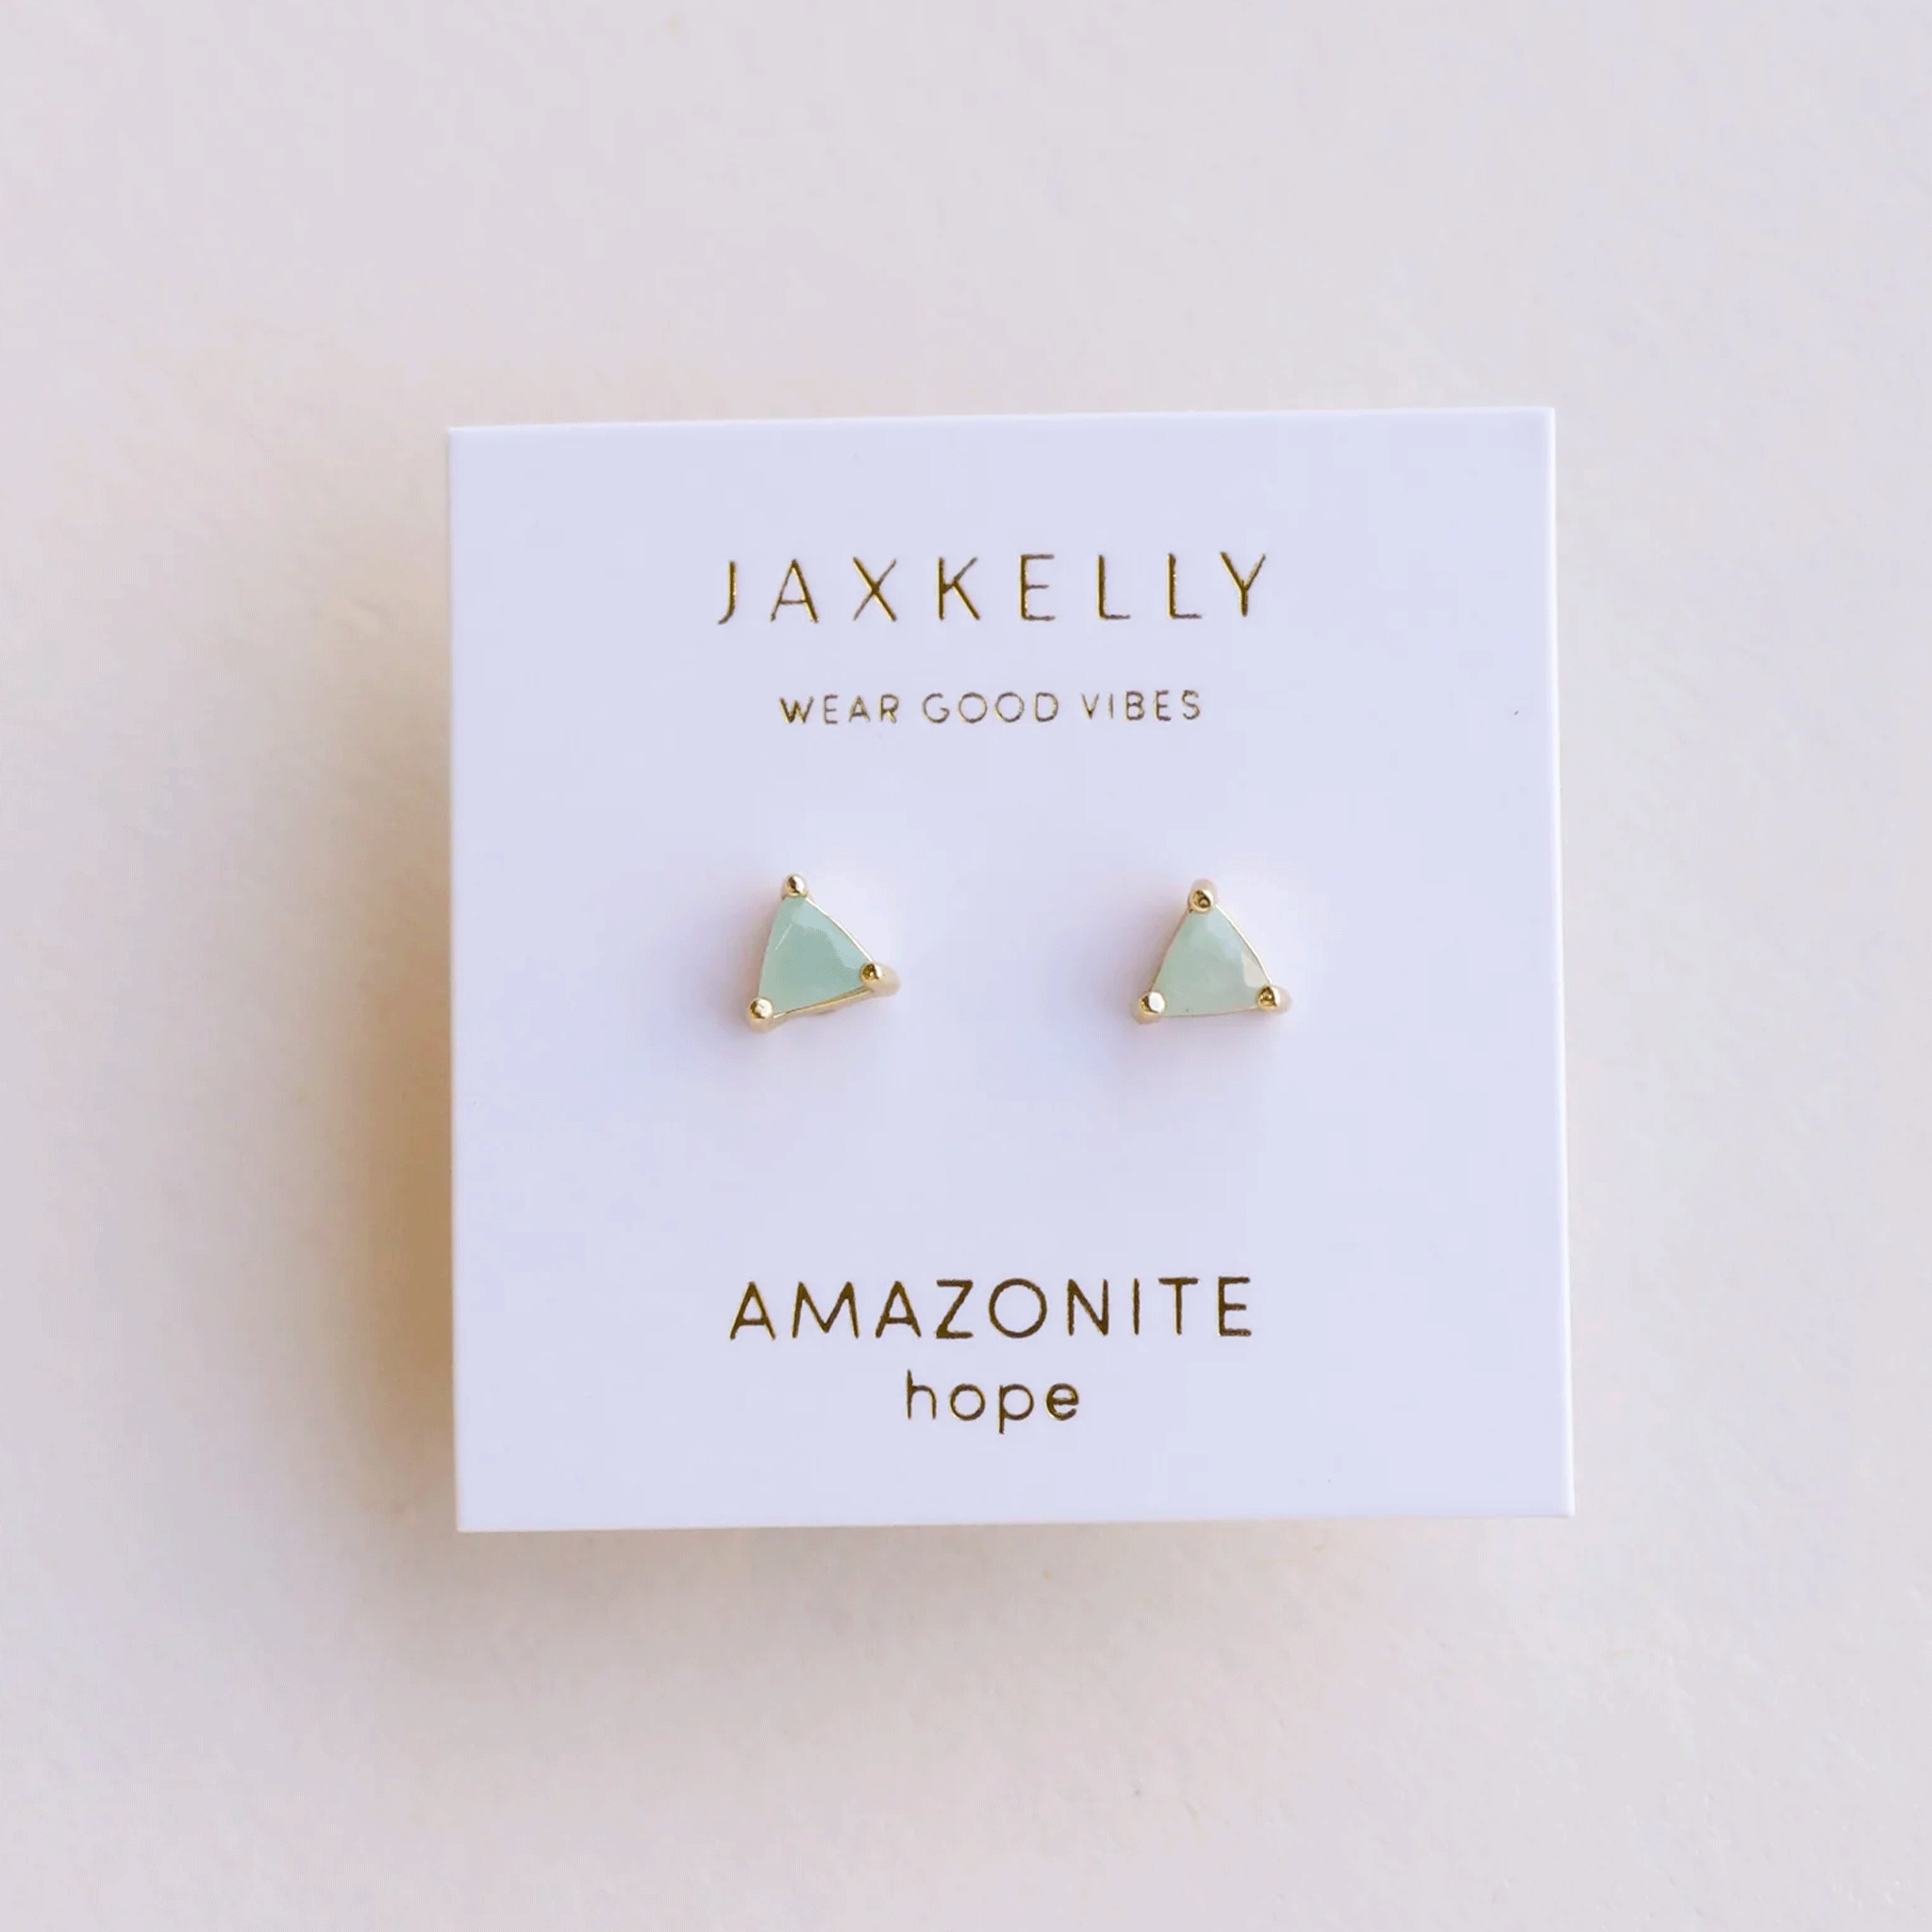 On a cream background is a white square piece of packaging holding a pair of green and gold amazonite stud earrings in a triangle shape along with gold text on the packaging that reads, &quot;JaxKelly Wear Good Vibes Amazonite hope&quot;.